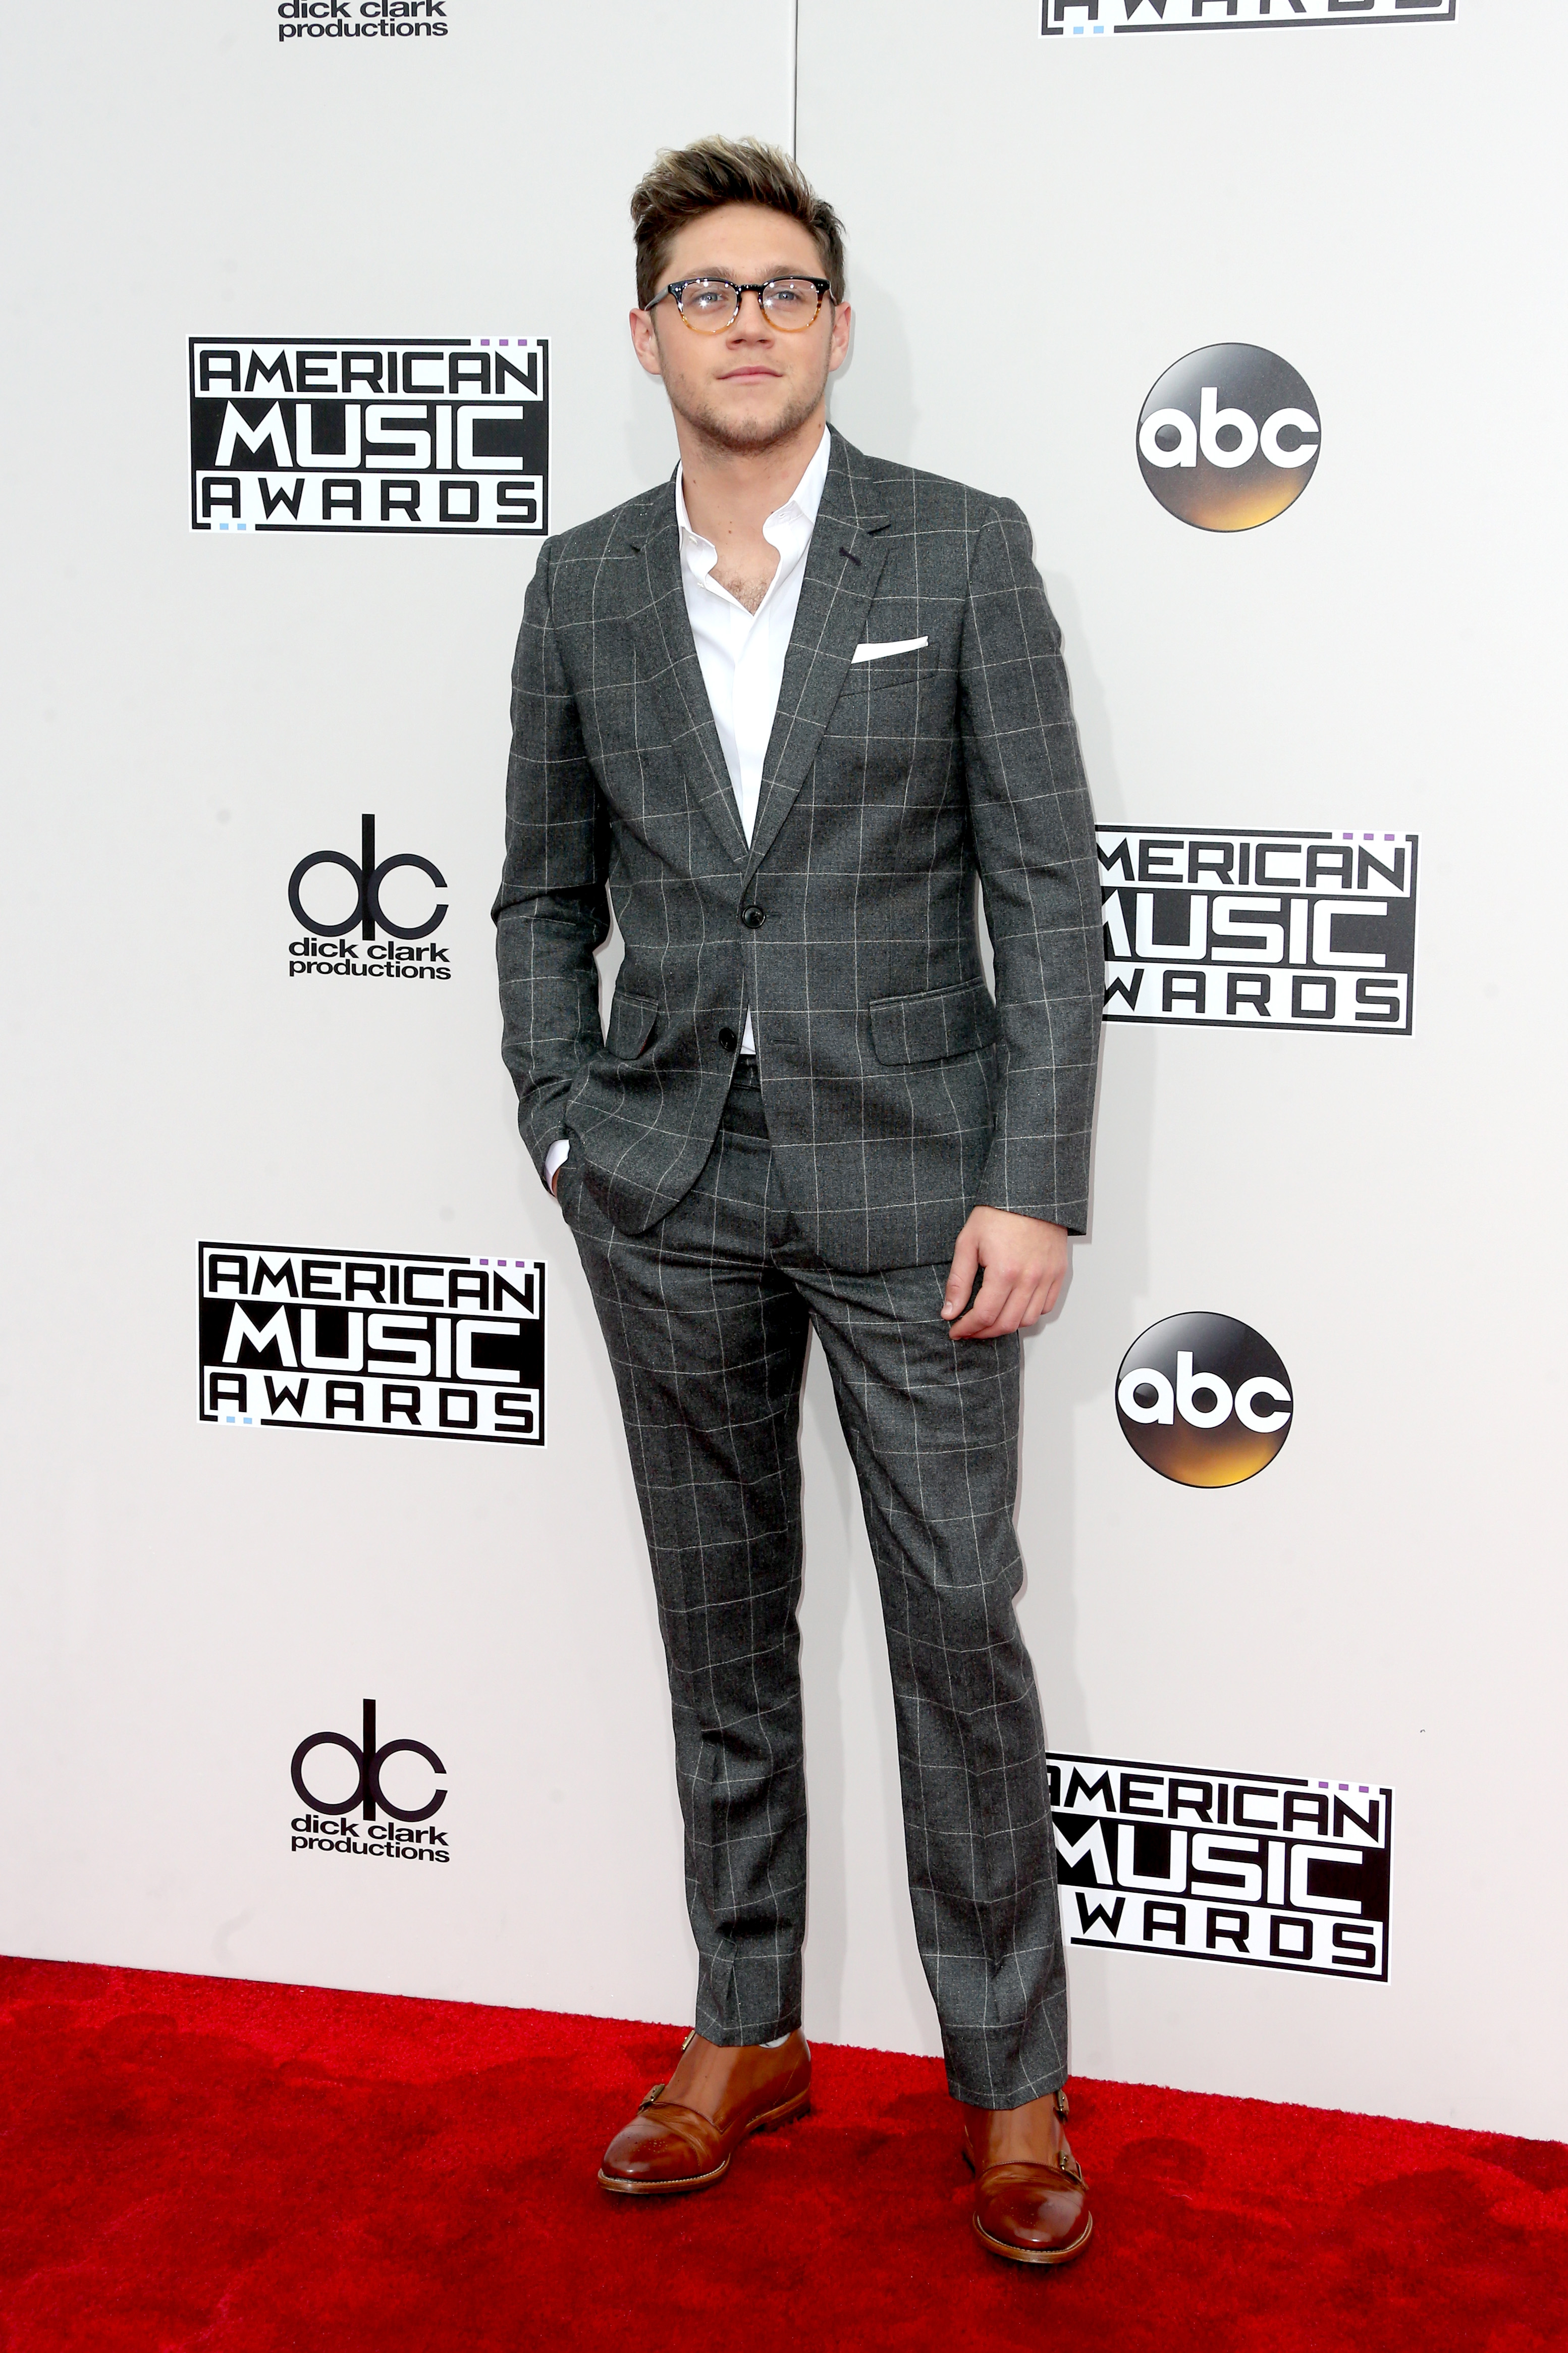 LOS ANGELES, CA - NOVEMBER 20: Recording artist Niall Horan attends the 2016 American Music Awards at Microsoft Theater on November 20, 2016 in Los Angeles, California. Frederick M. Brown/Getty Images/AFP